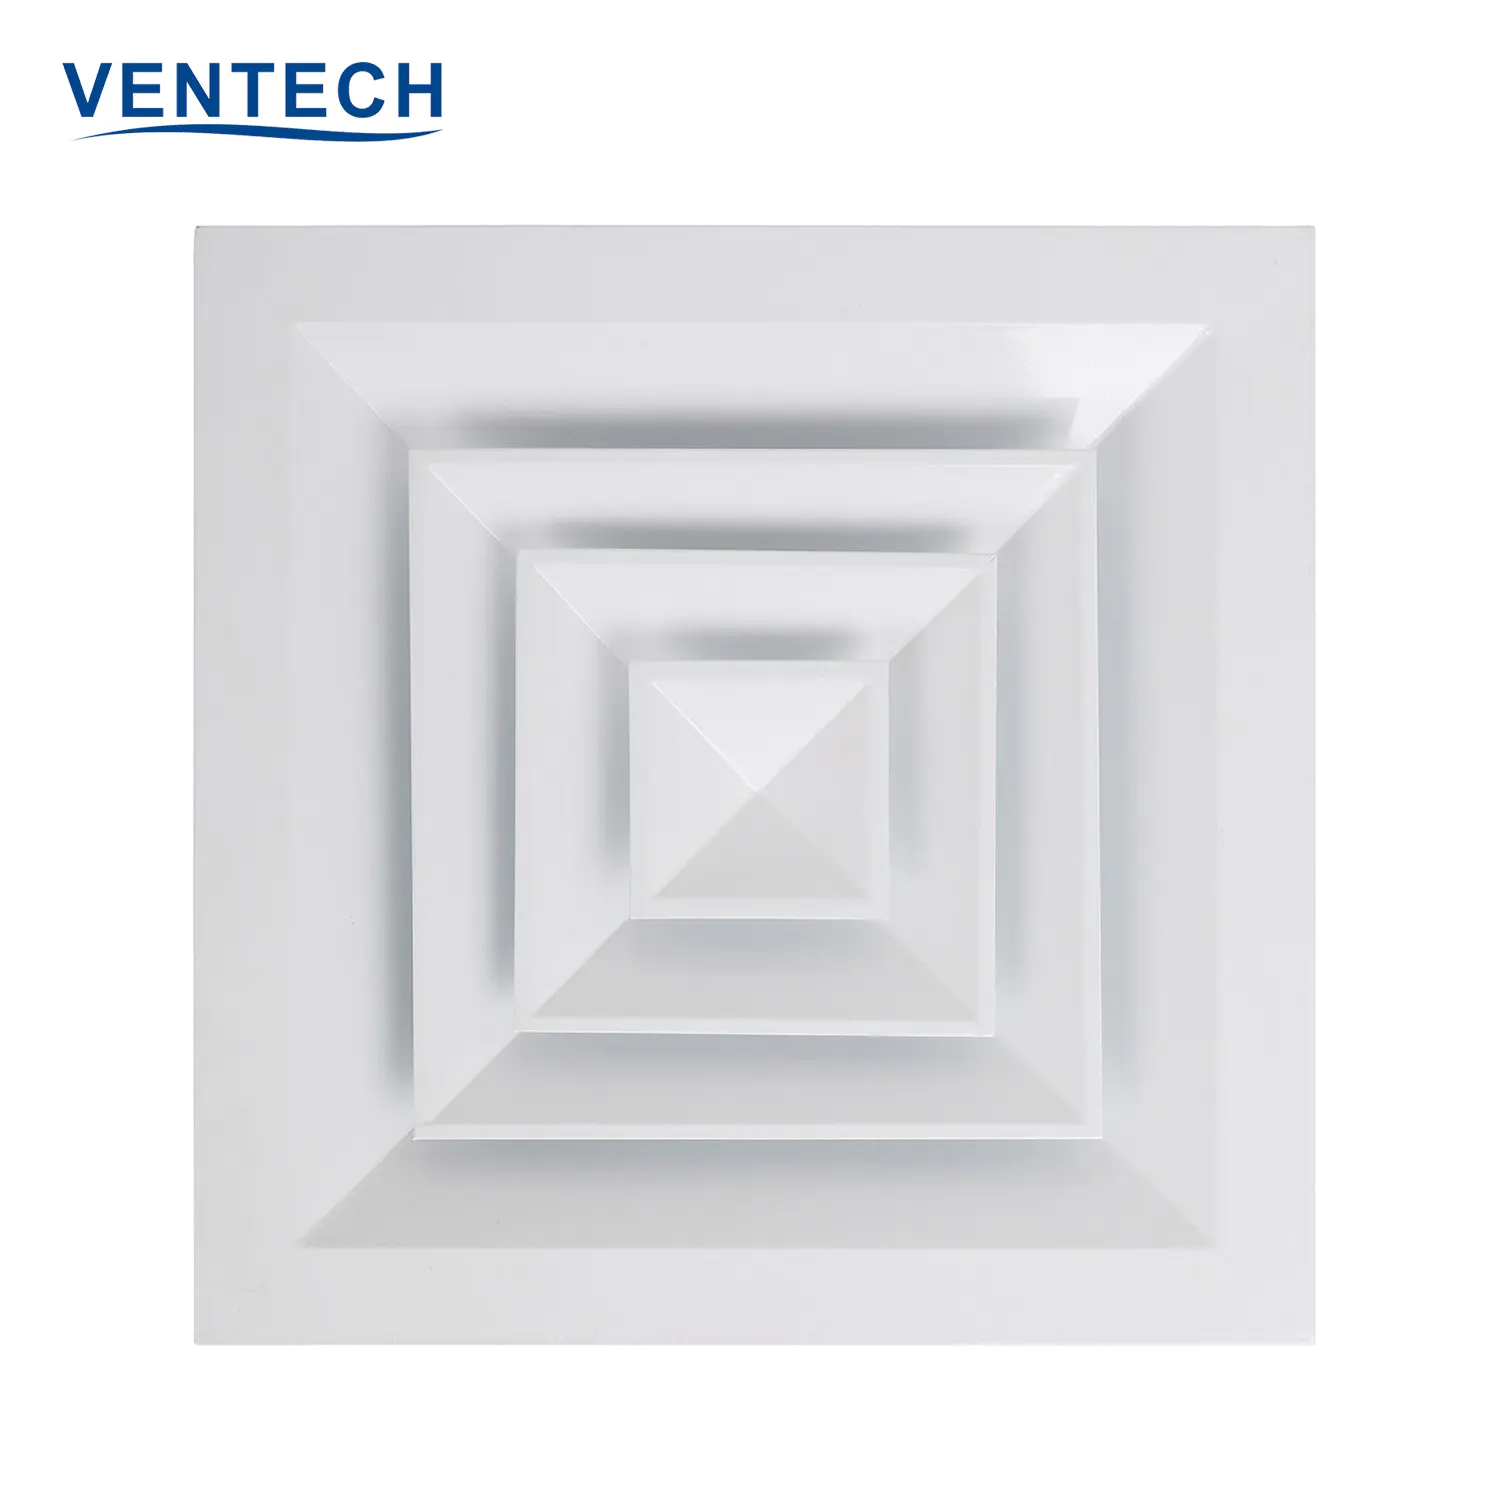 Hvac System VENTECH Aluminum Exhaust Conditioning Outlet Square 4 Way Supply Ceiling Air Duct Ac Diffusers